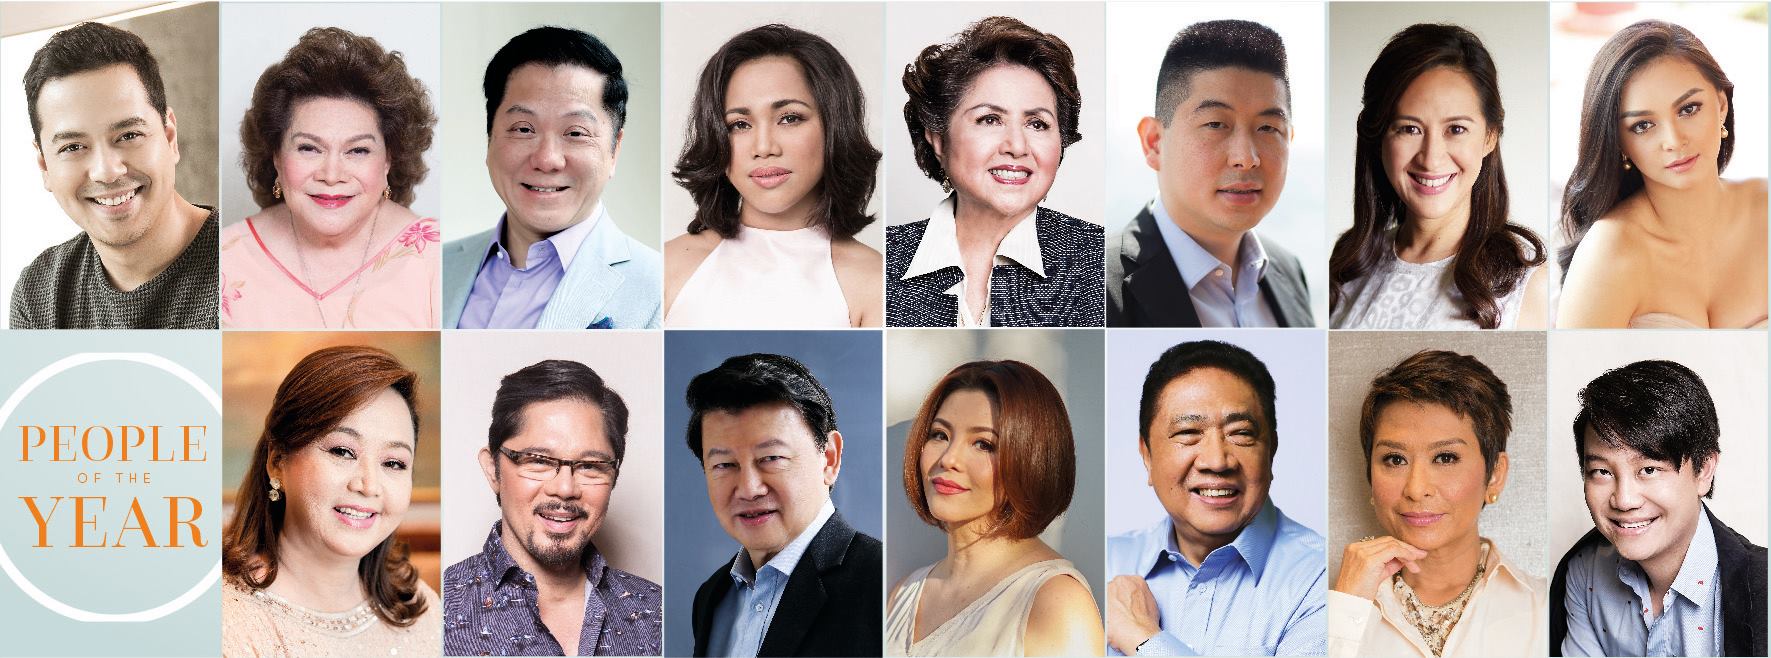 PeopleAsia’s People of the Year 2017 Awards Night